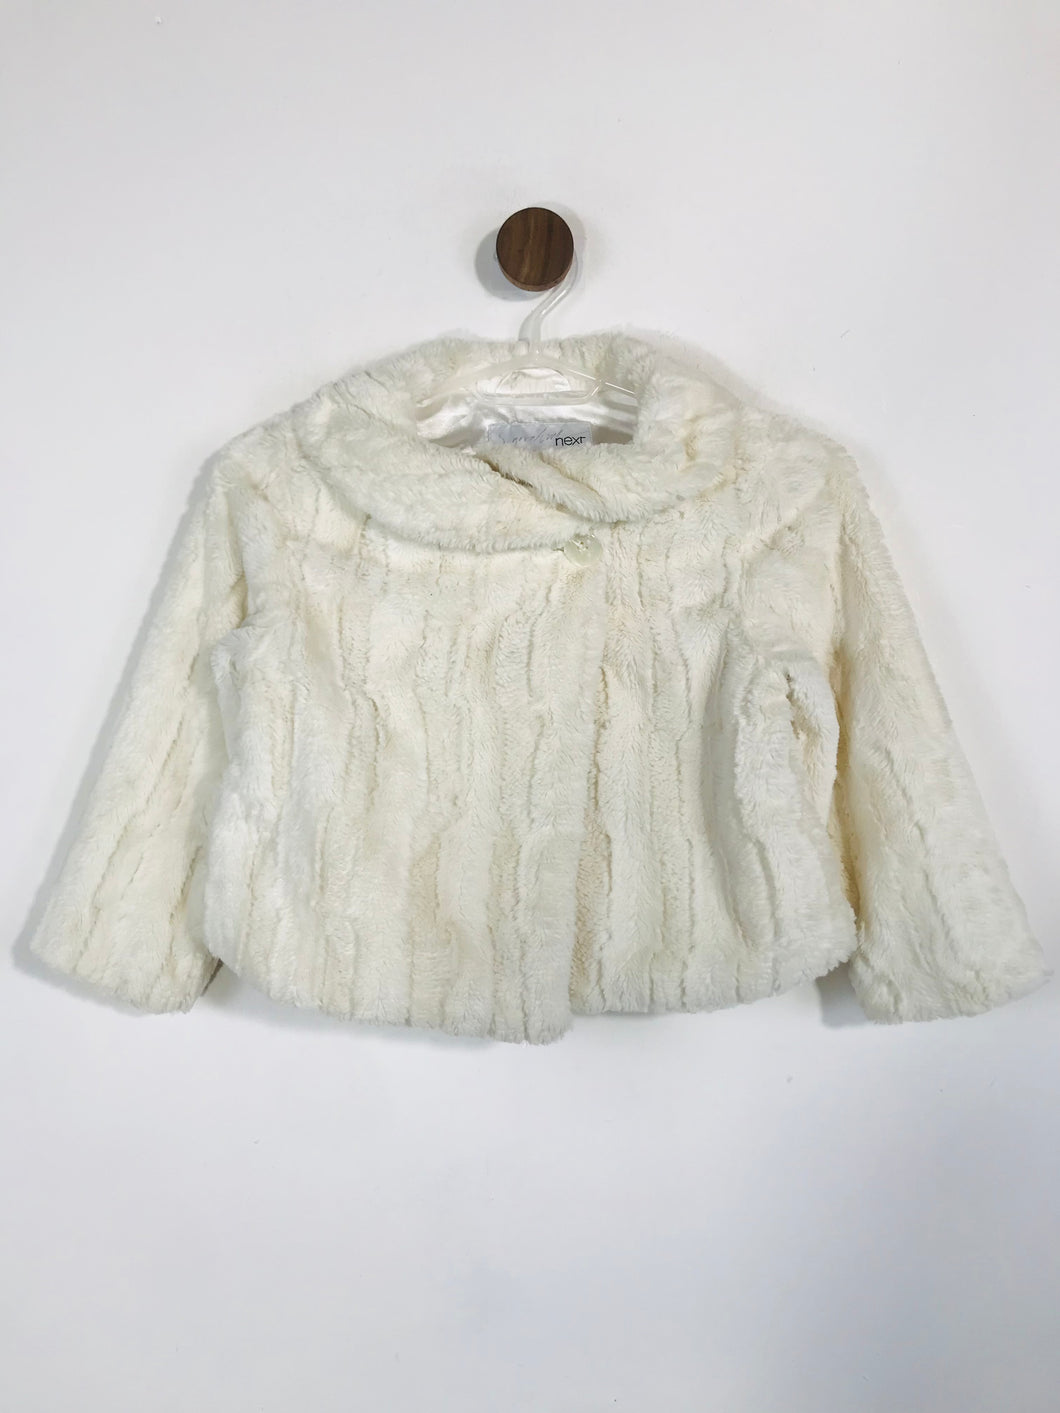 Next Signature Kid's Faux Fur Jacket | 4-5 Years | White